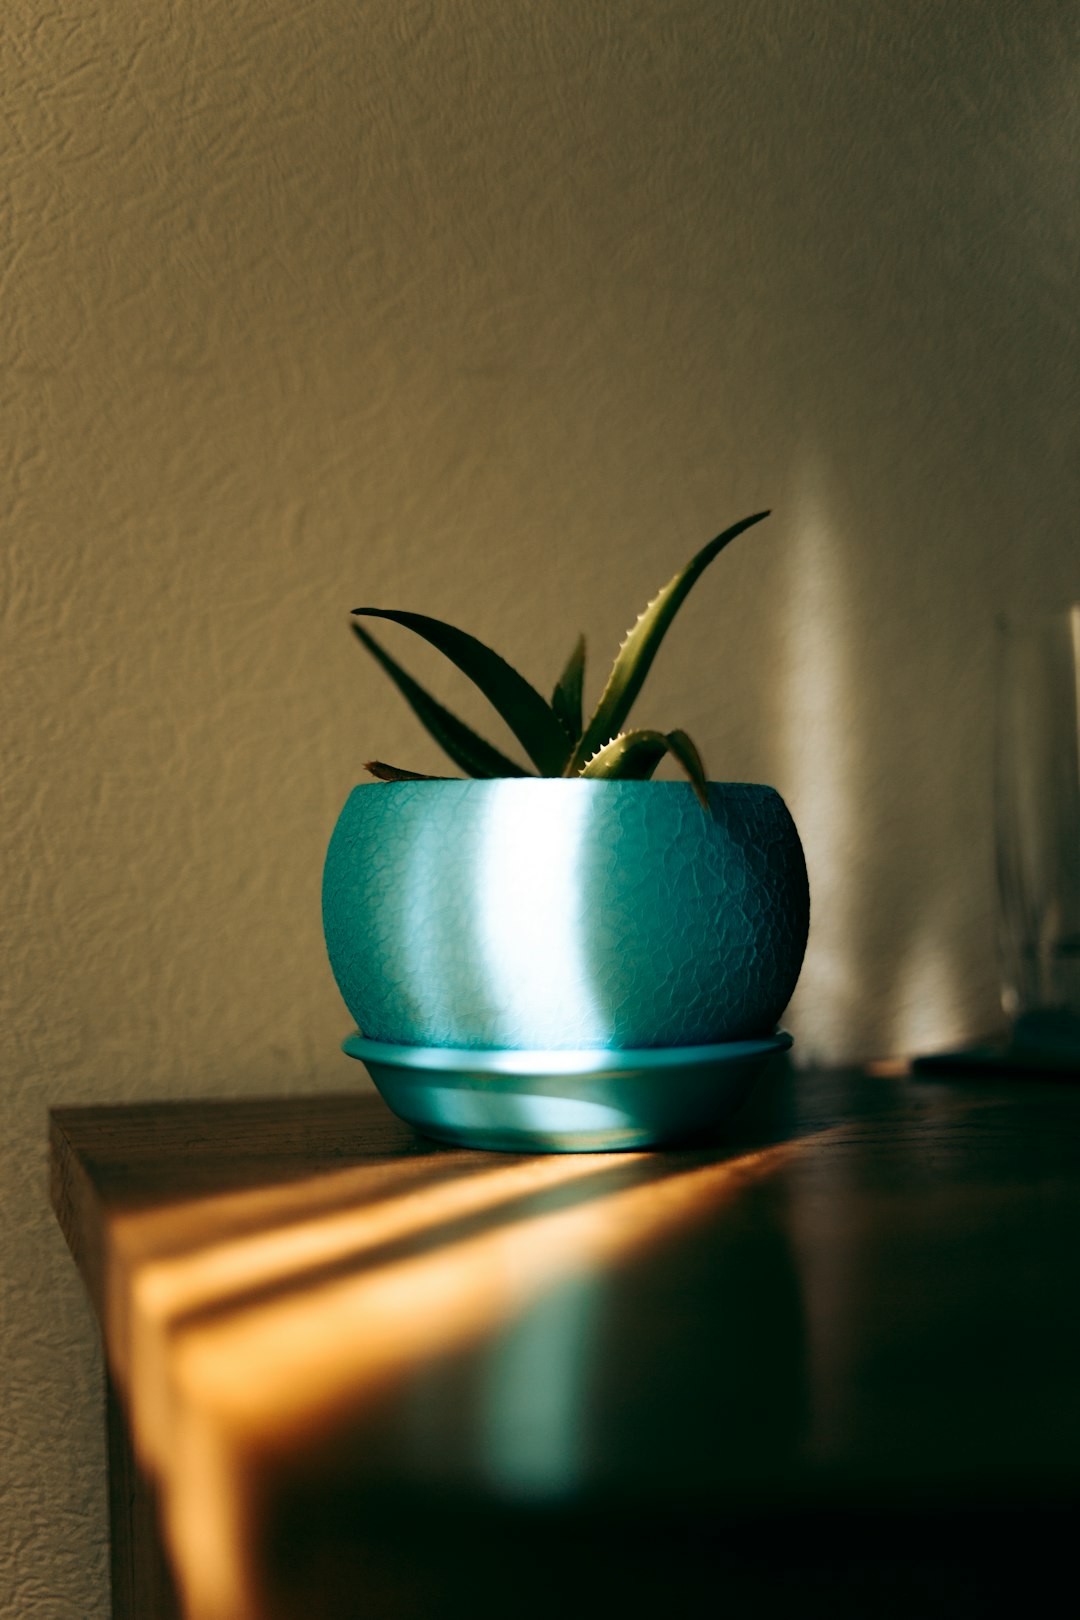 green plant in blue ceramic pot on brown wooden table